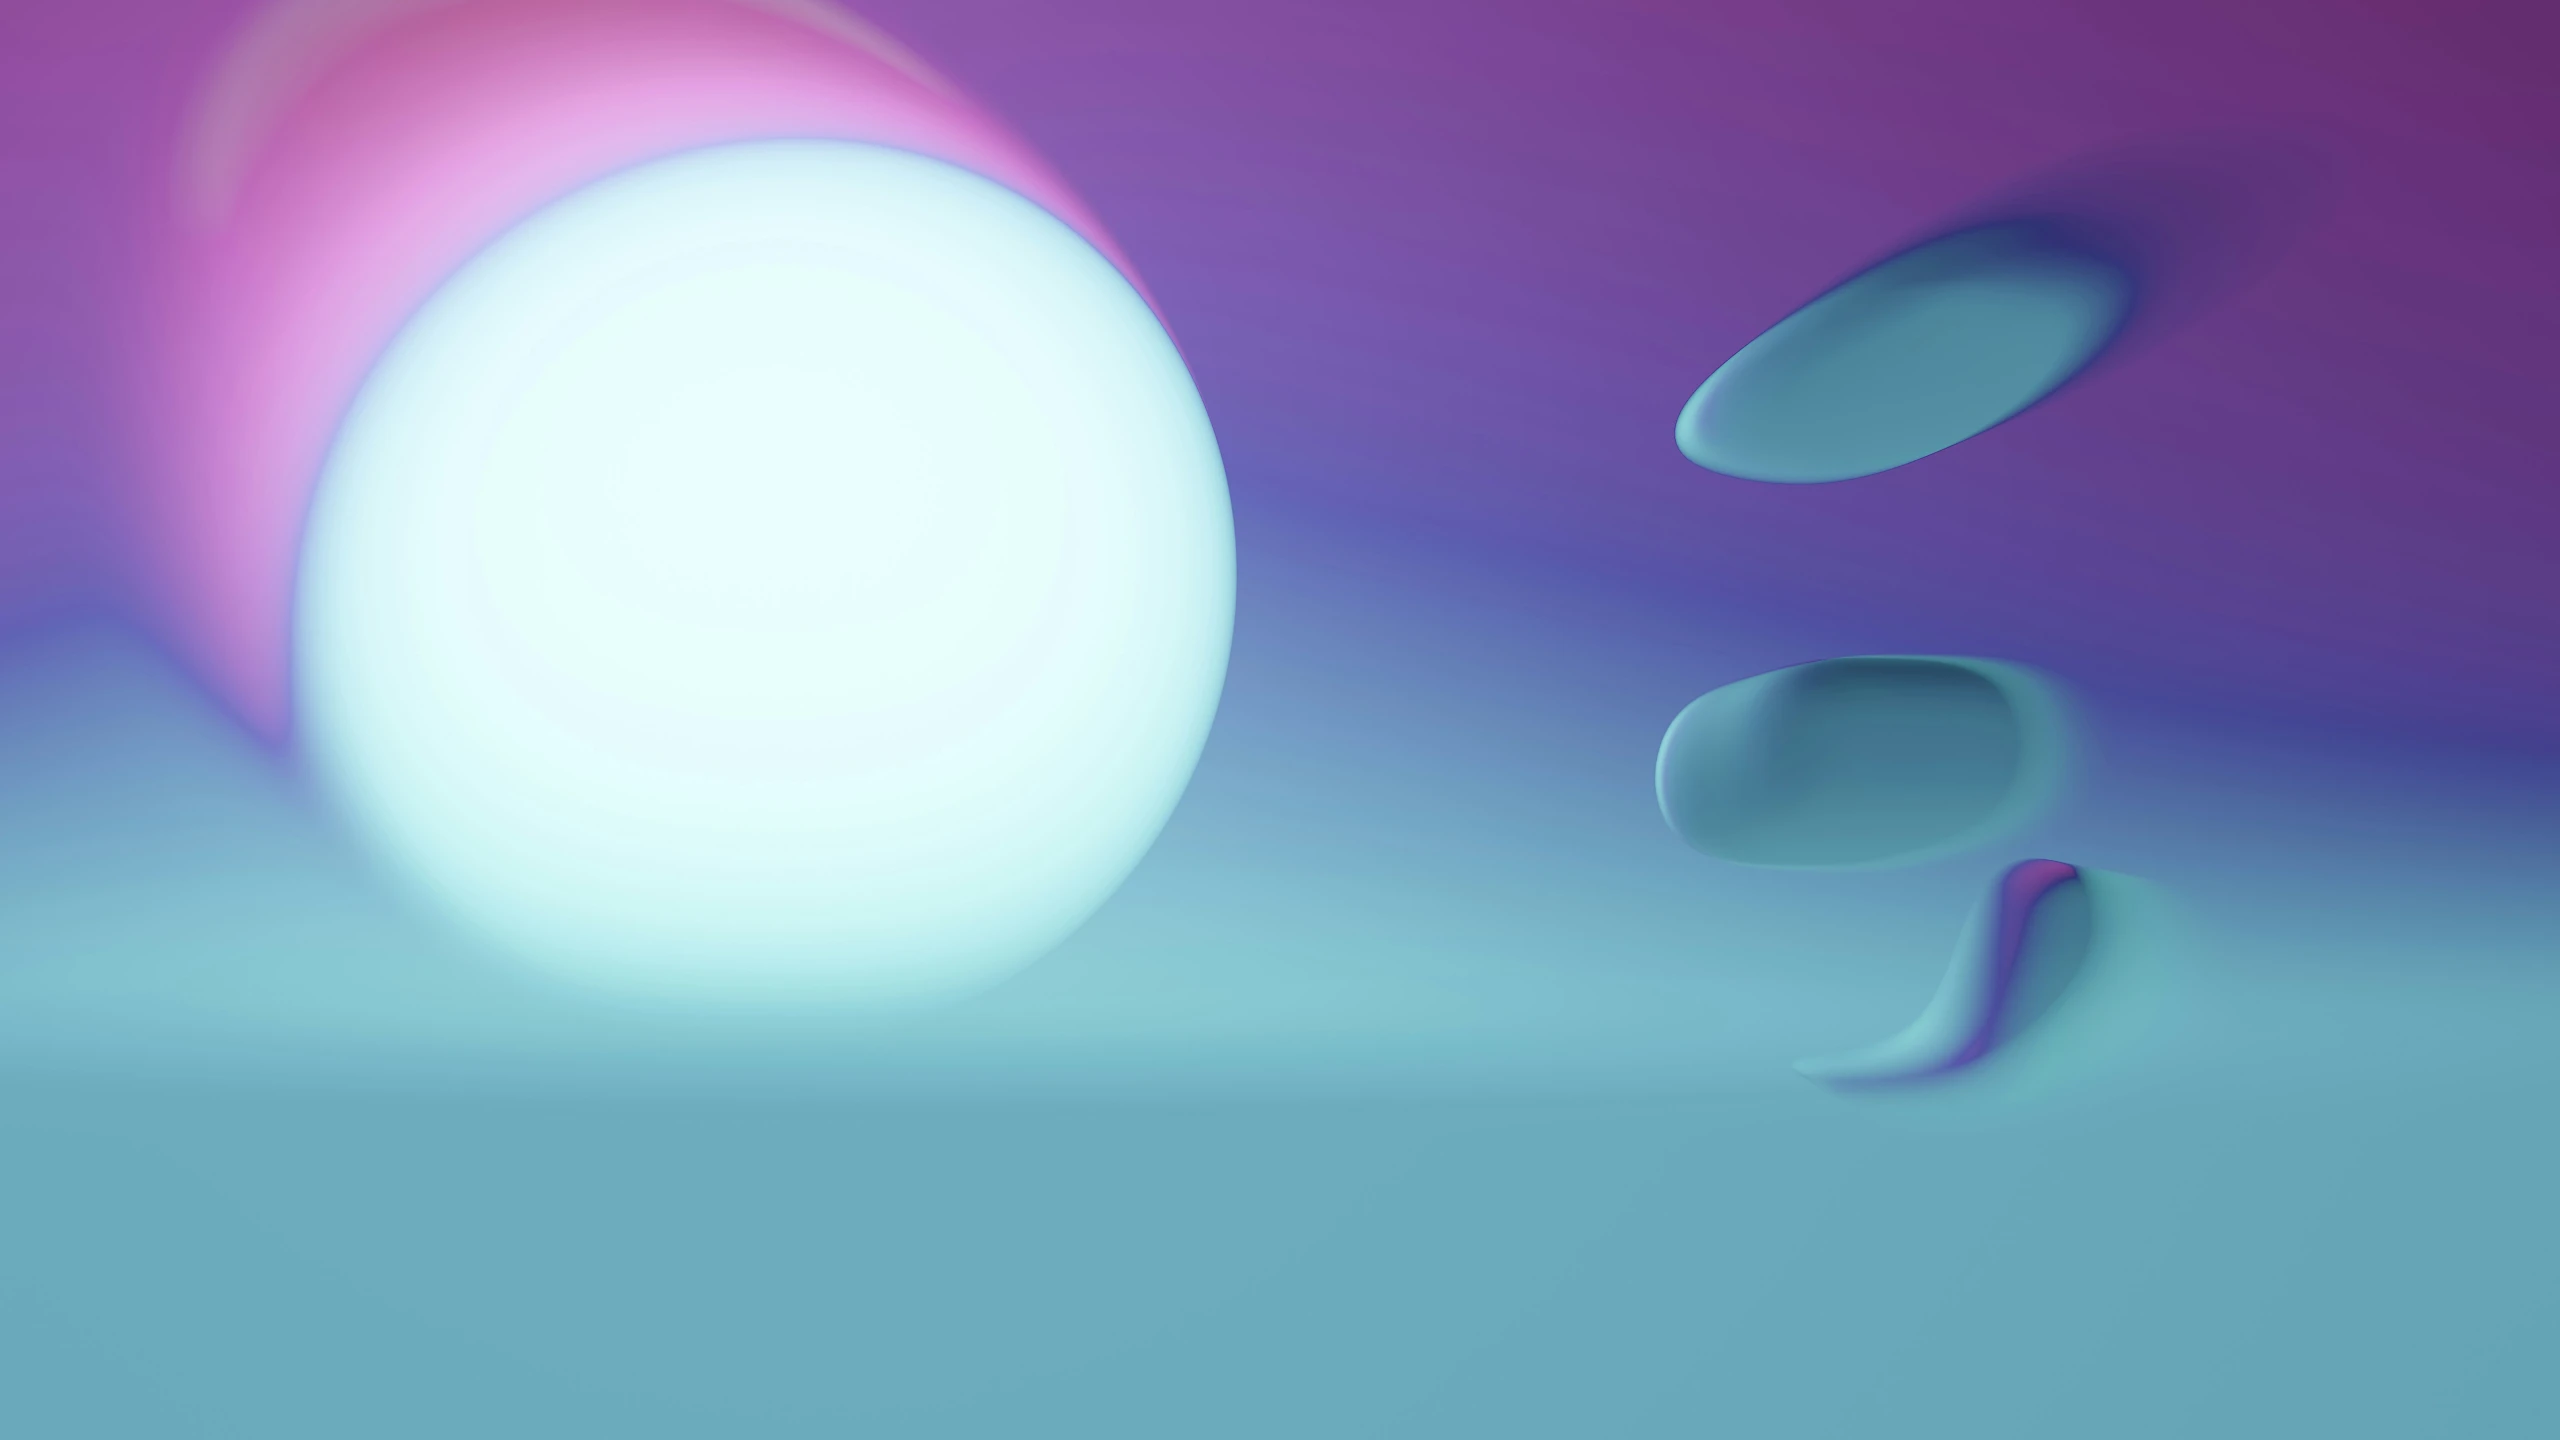 three blue circles in front of an purple background